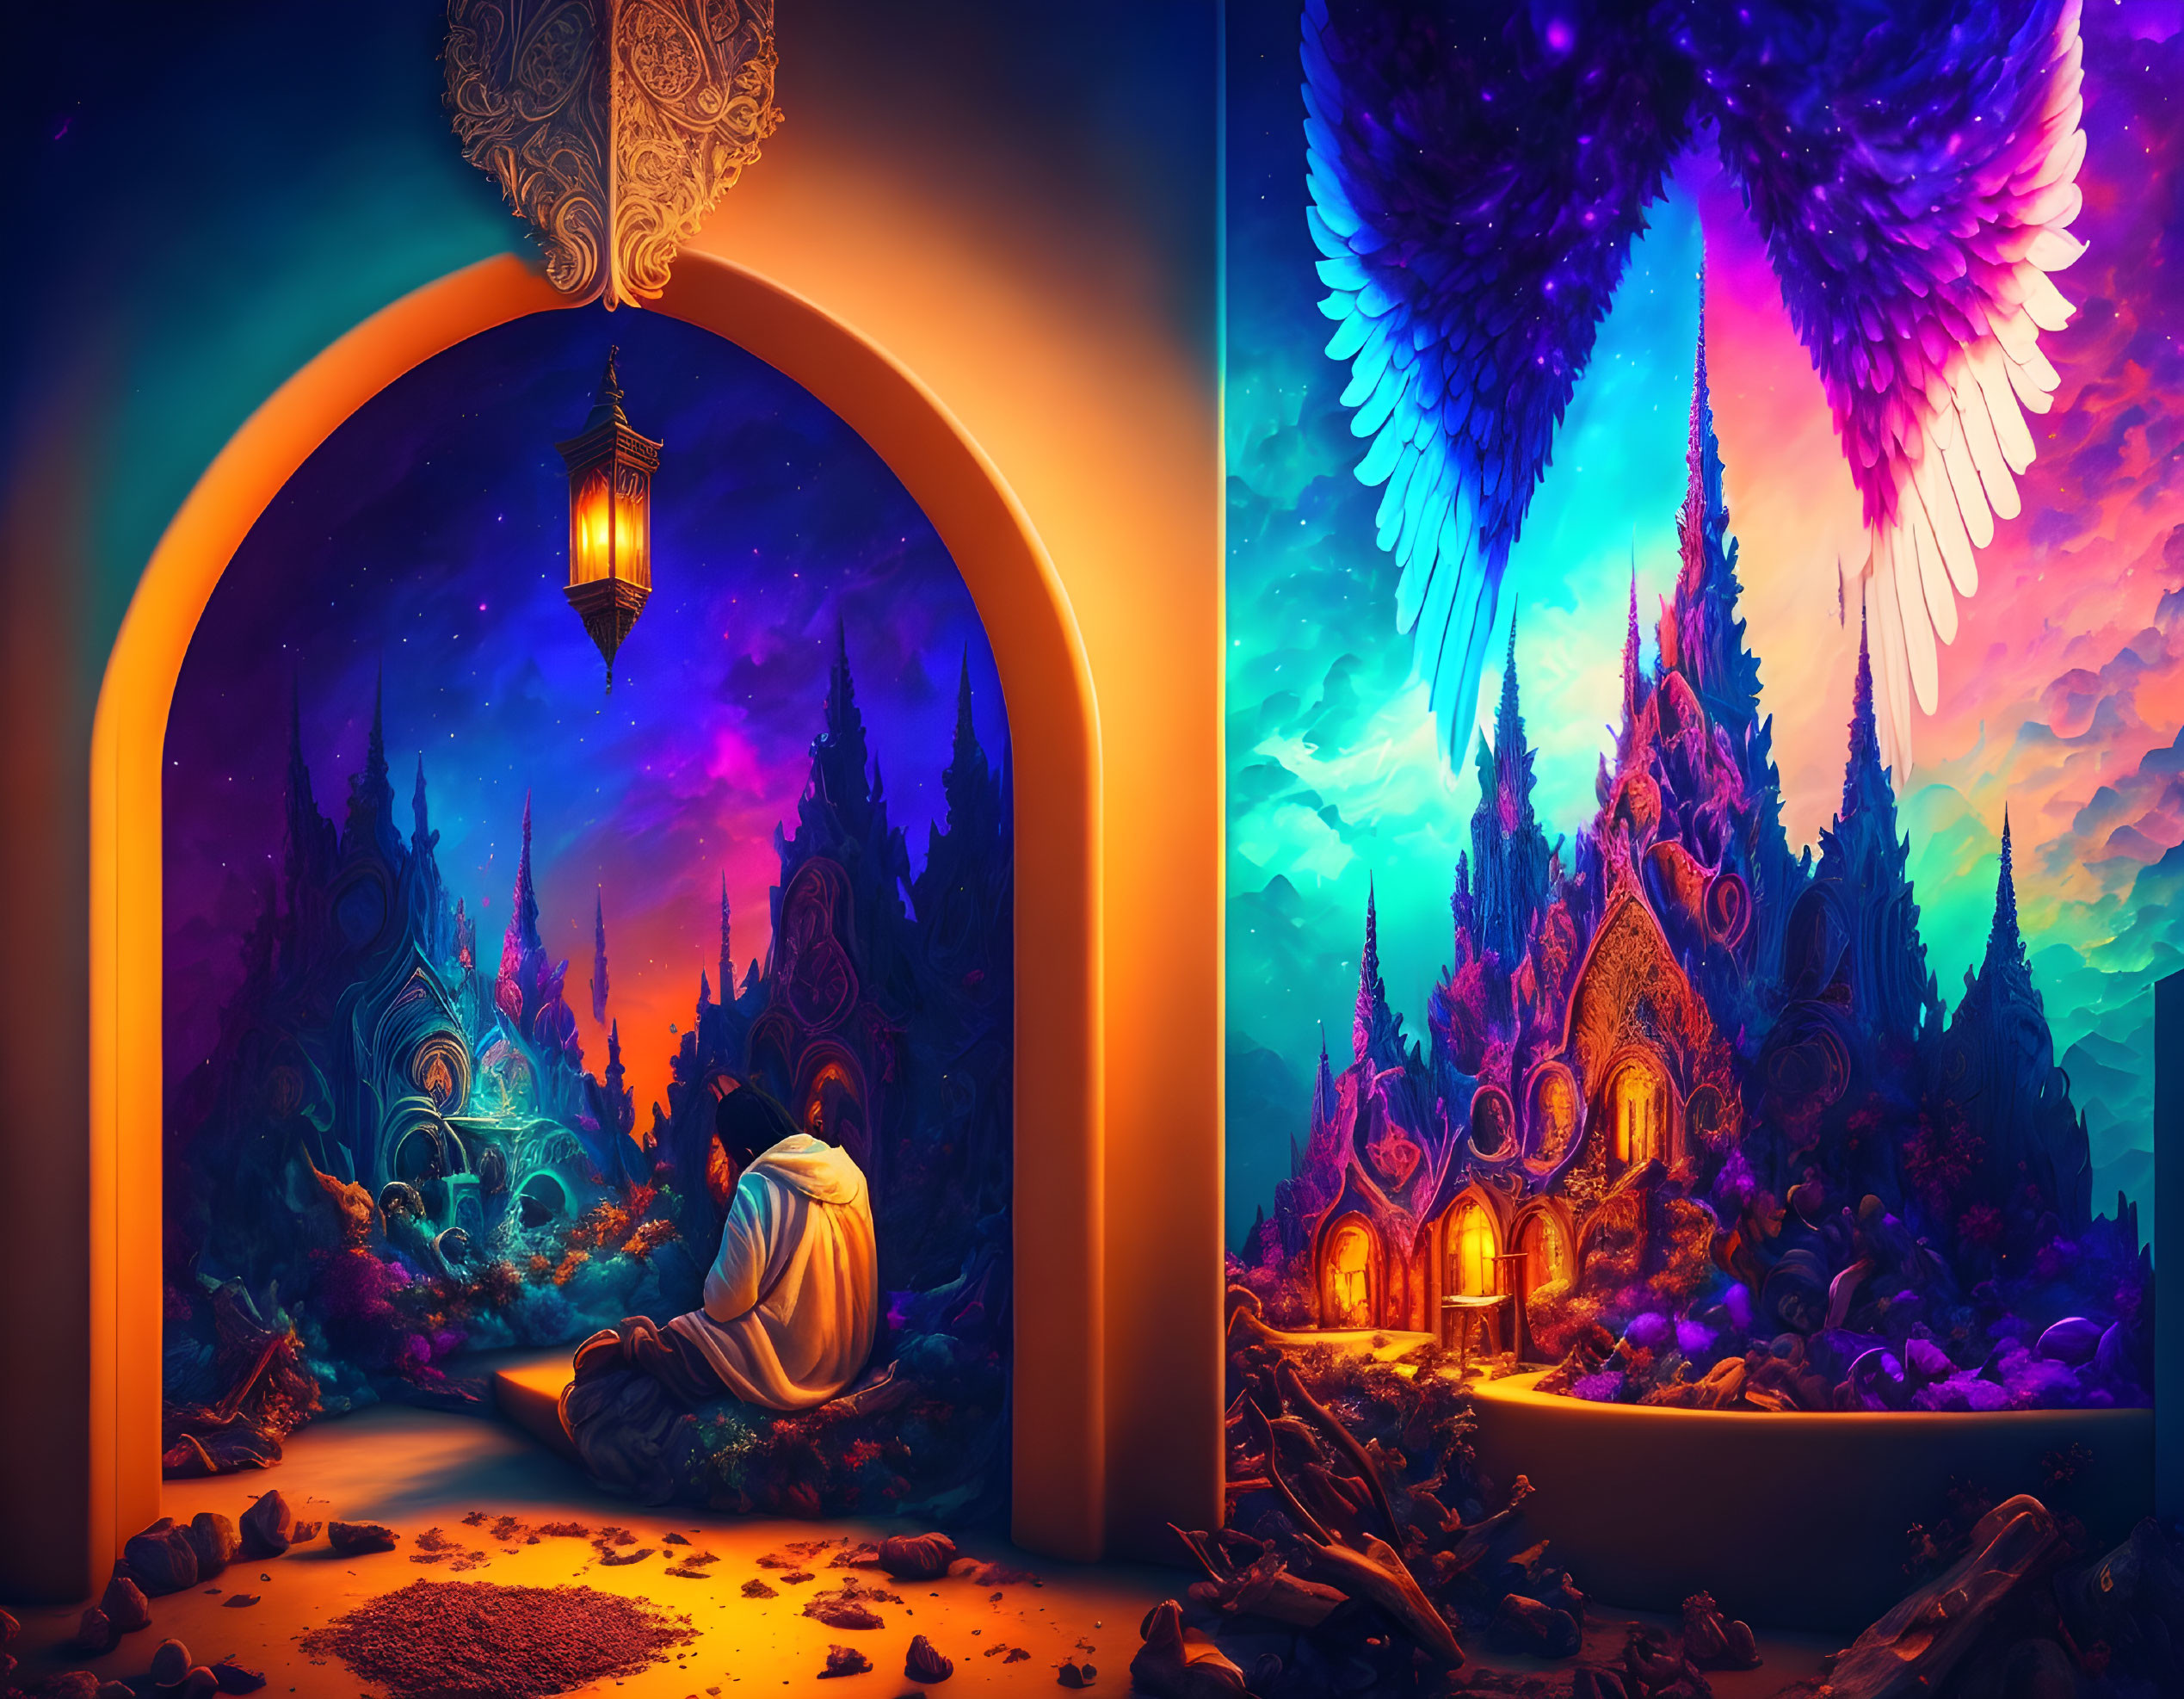 Cloaked figure at colorful archway gazes at mystical landscape with iridescent creature